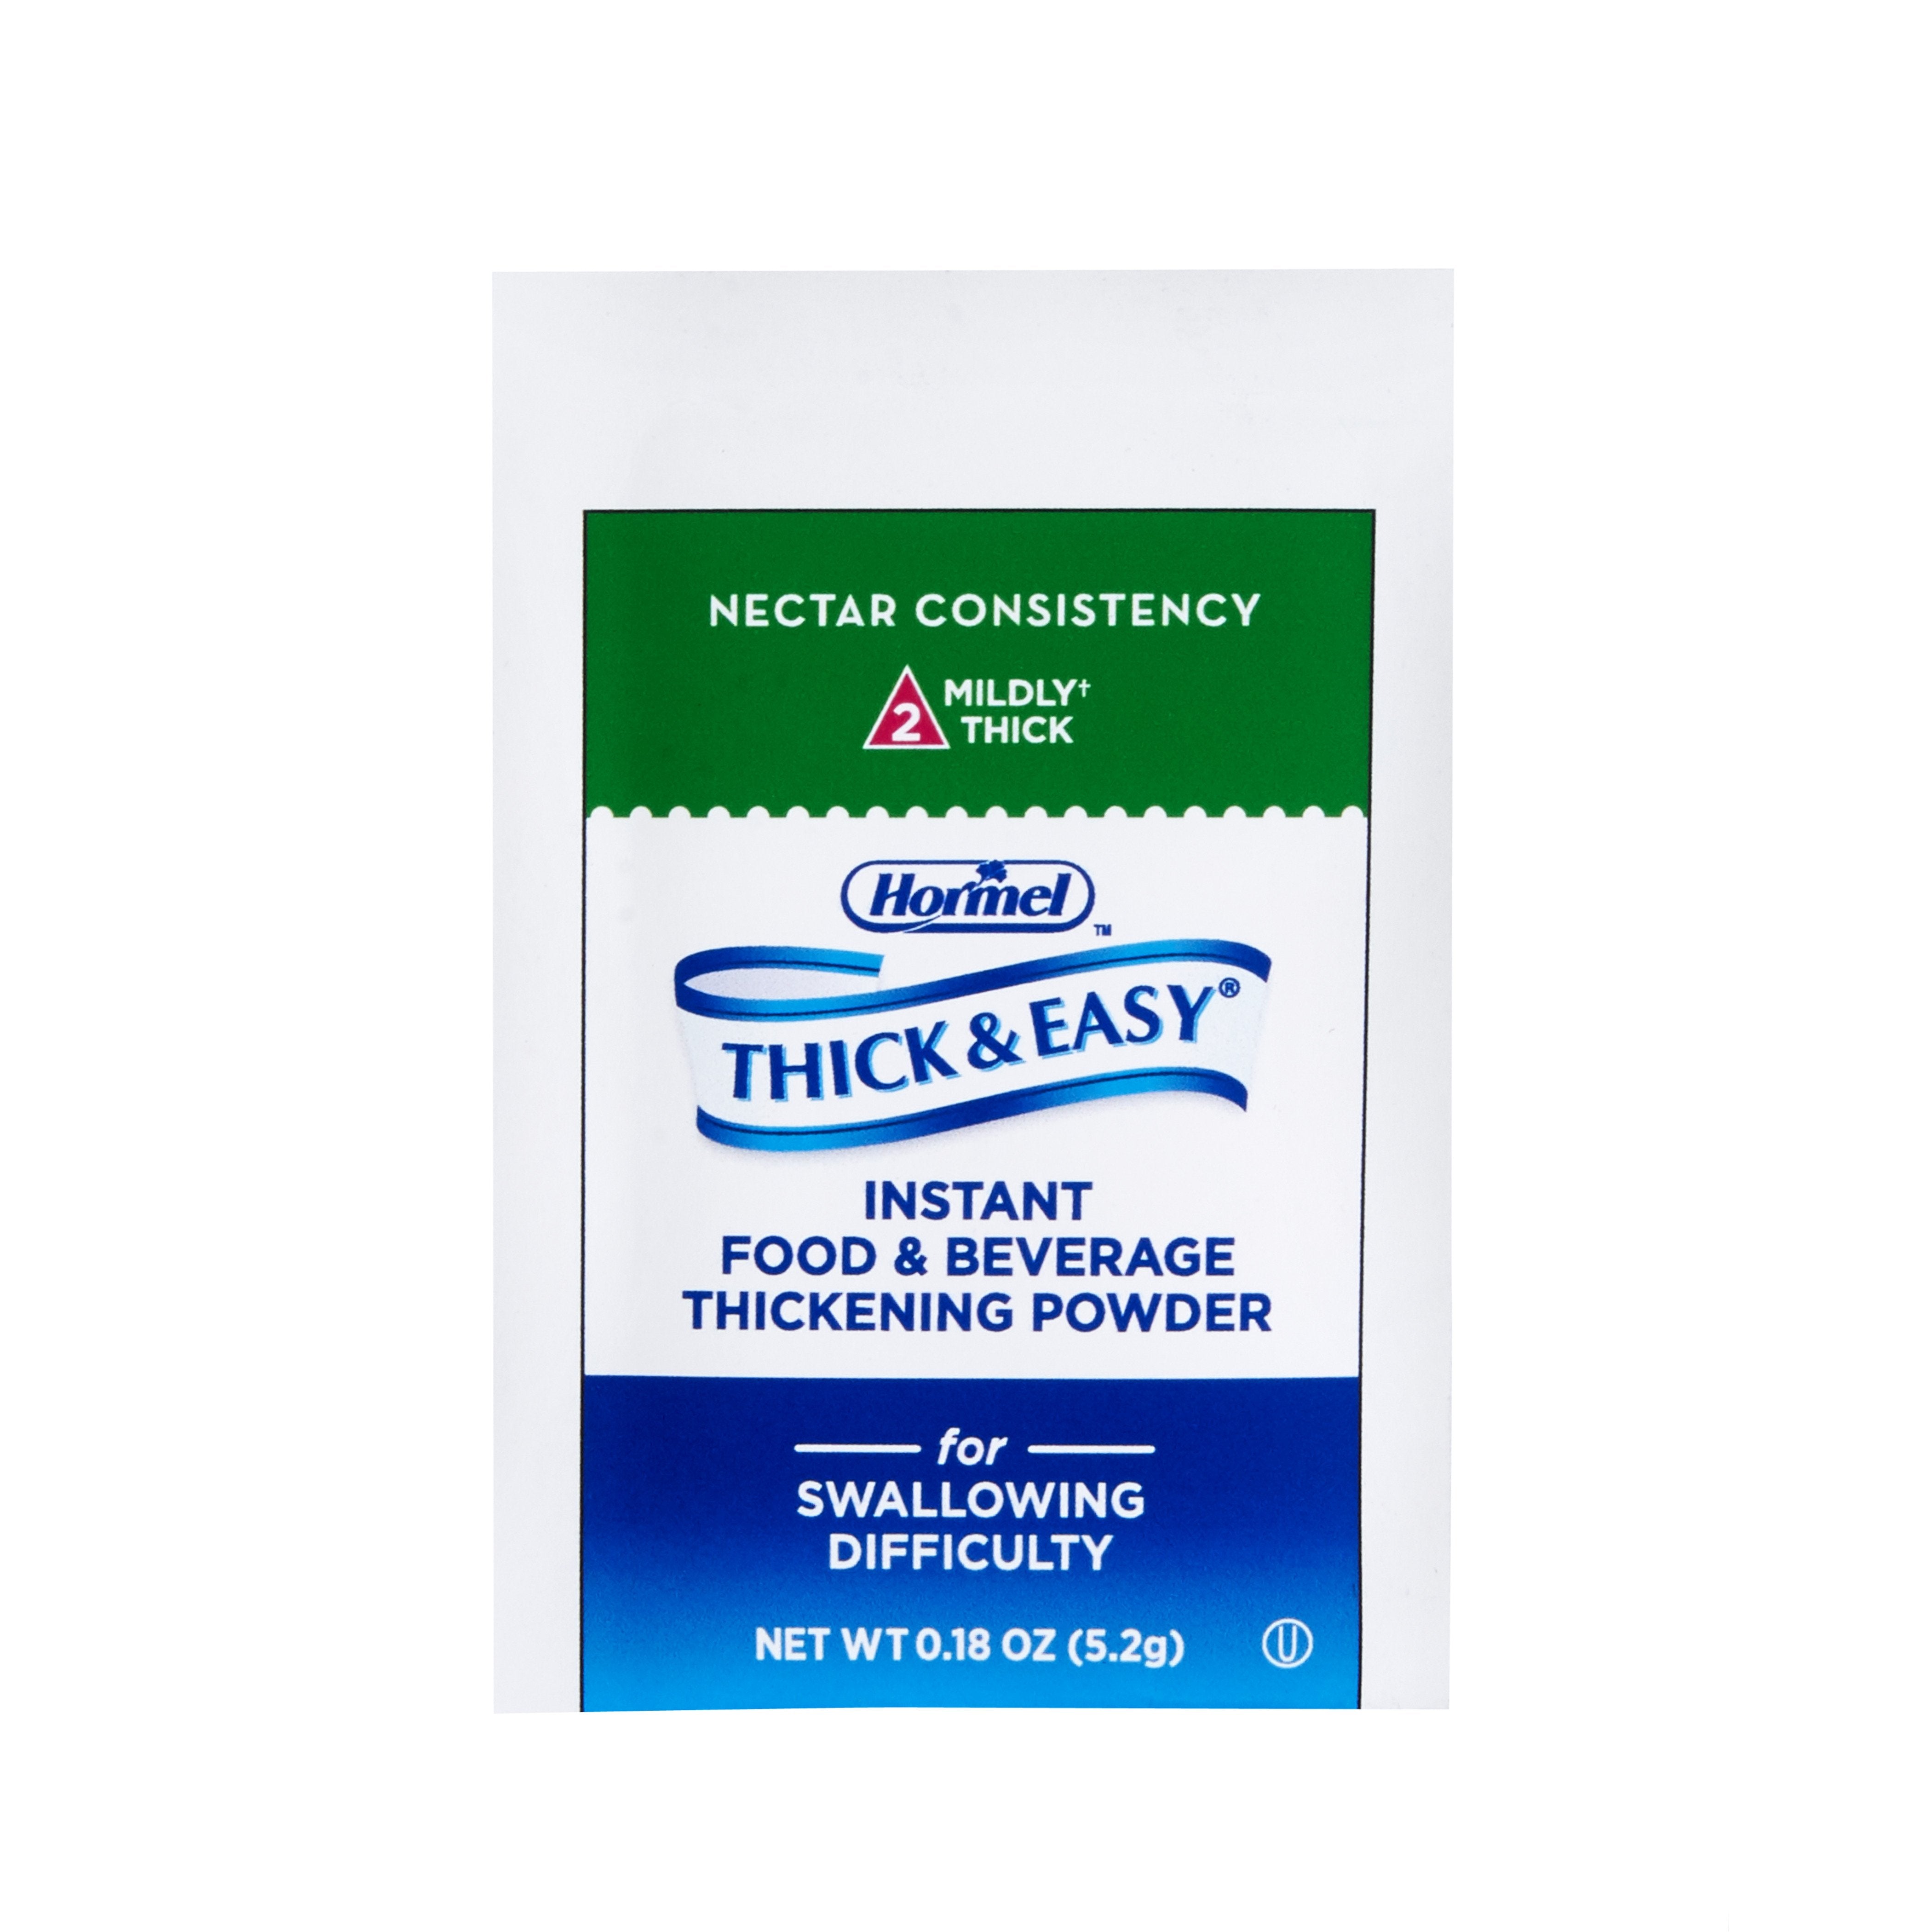 Thick & Easy? Nectar Consistency, Food and Beverage Thickener, 0.18 oz. Packet